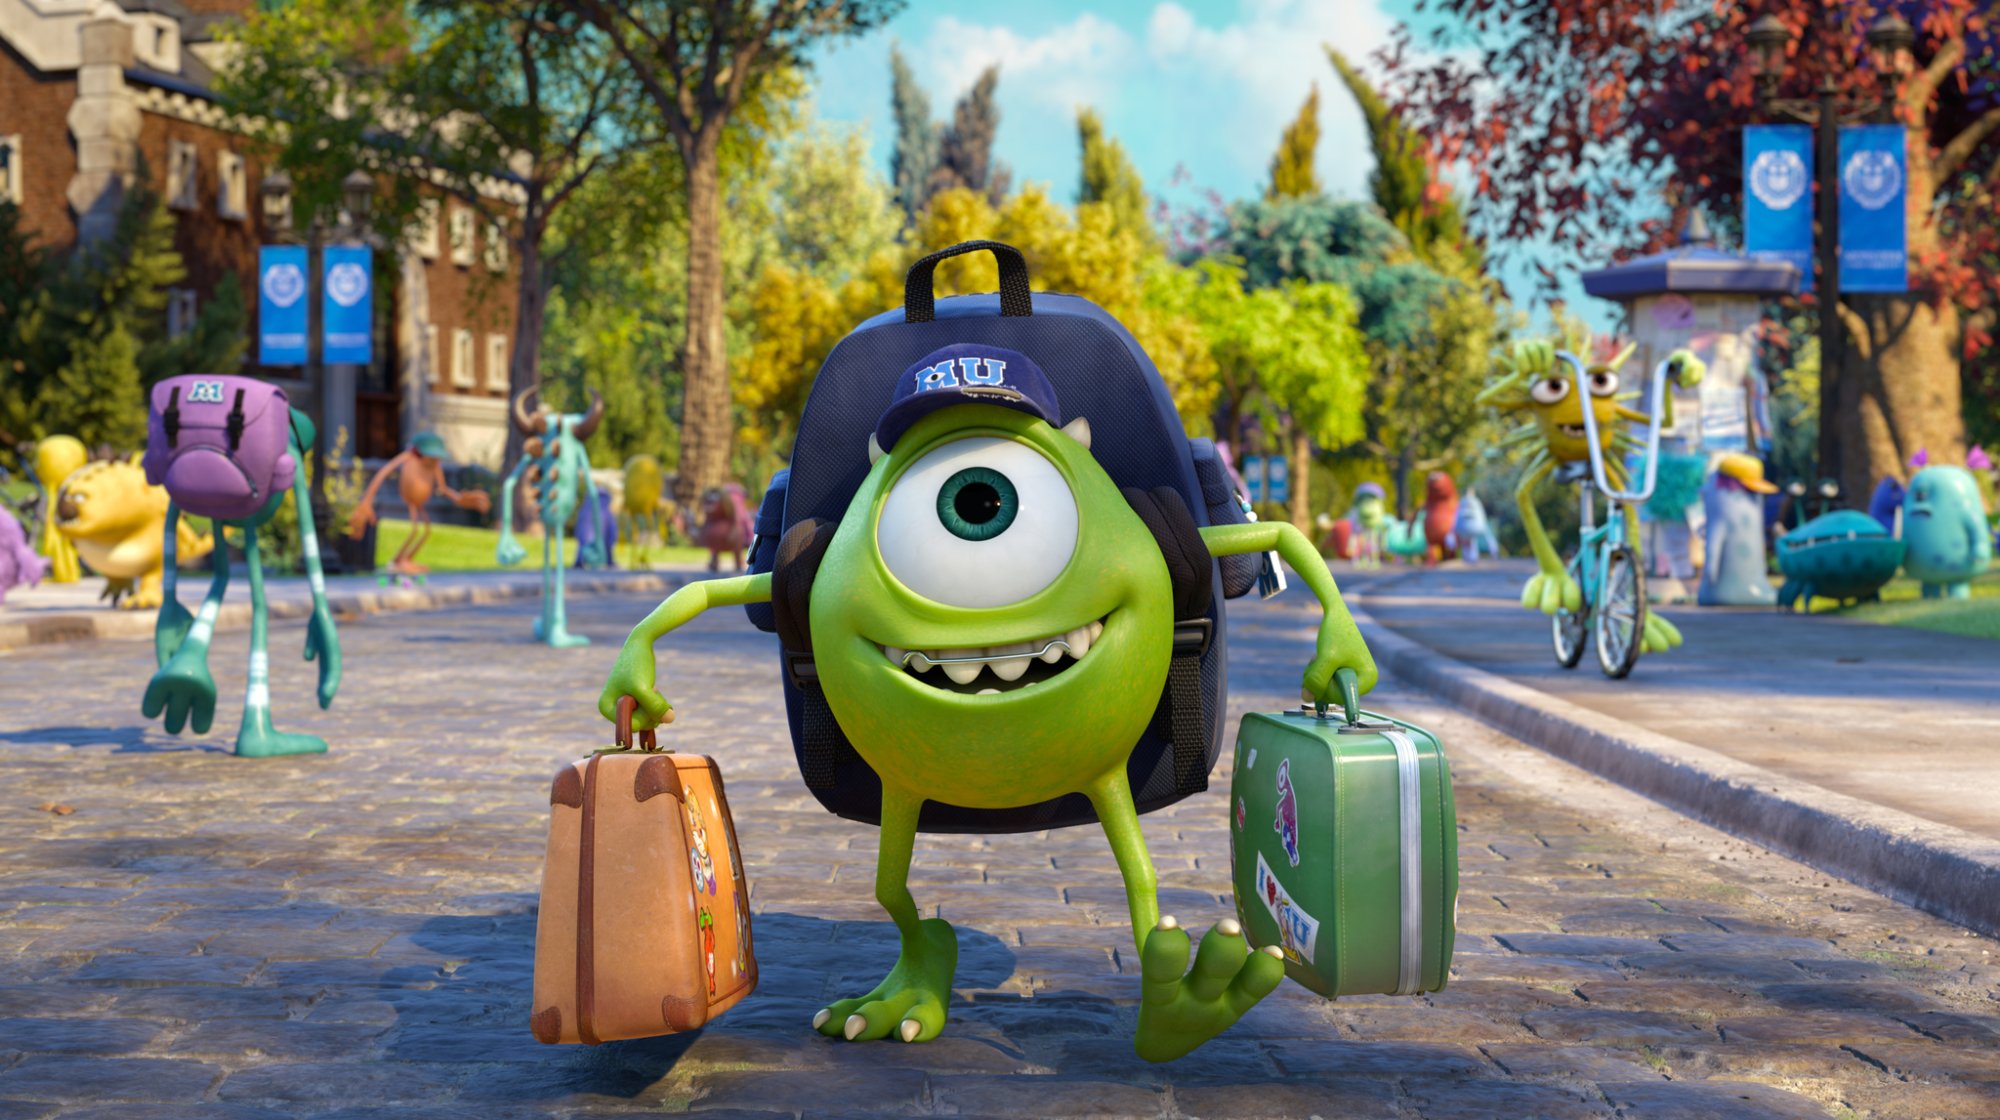 Pixar movie 'Monsters University' starring Mike Wazowski (voiced by Billy Crystal). He's holding baggage and wearing a university hat taking step into the university.